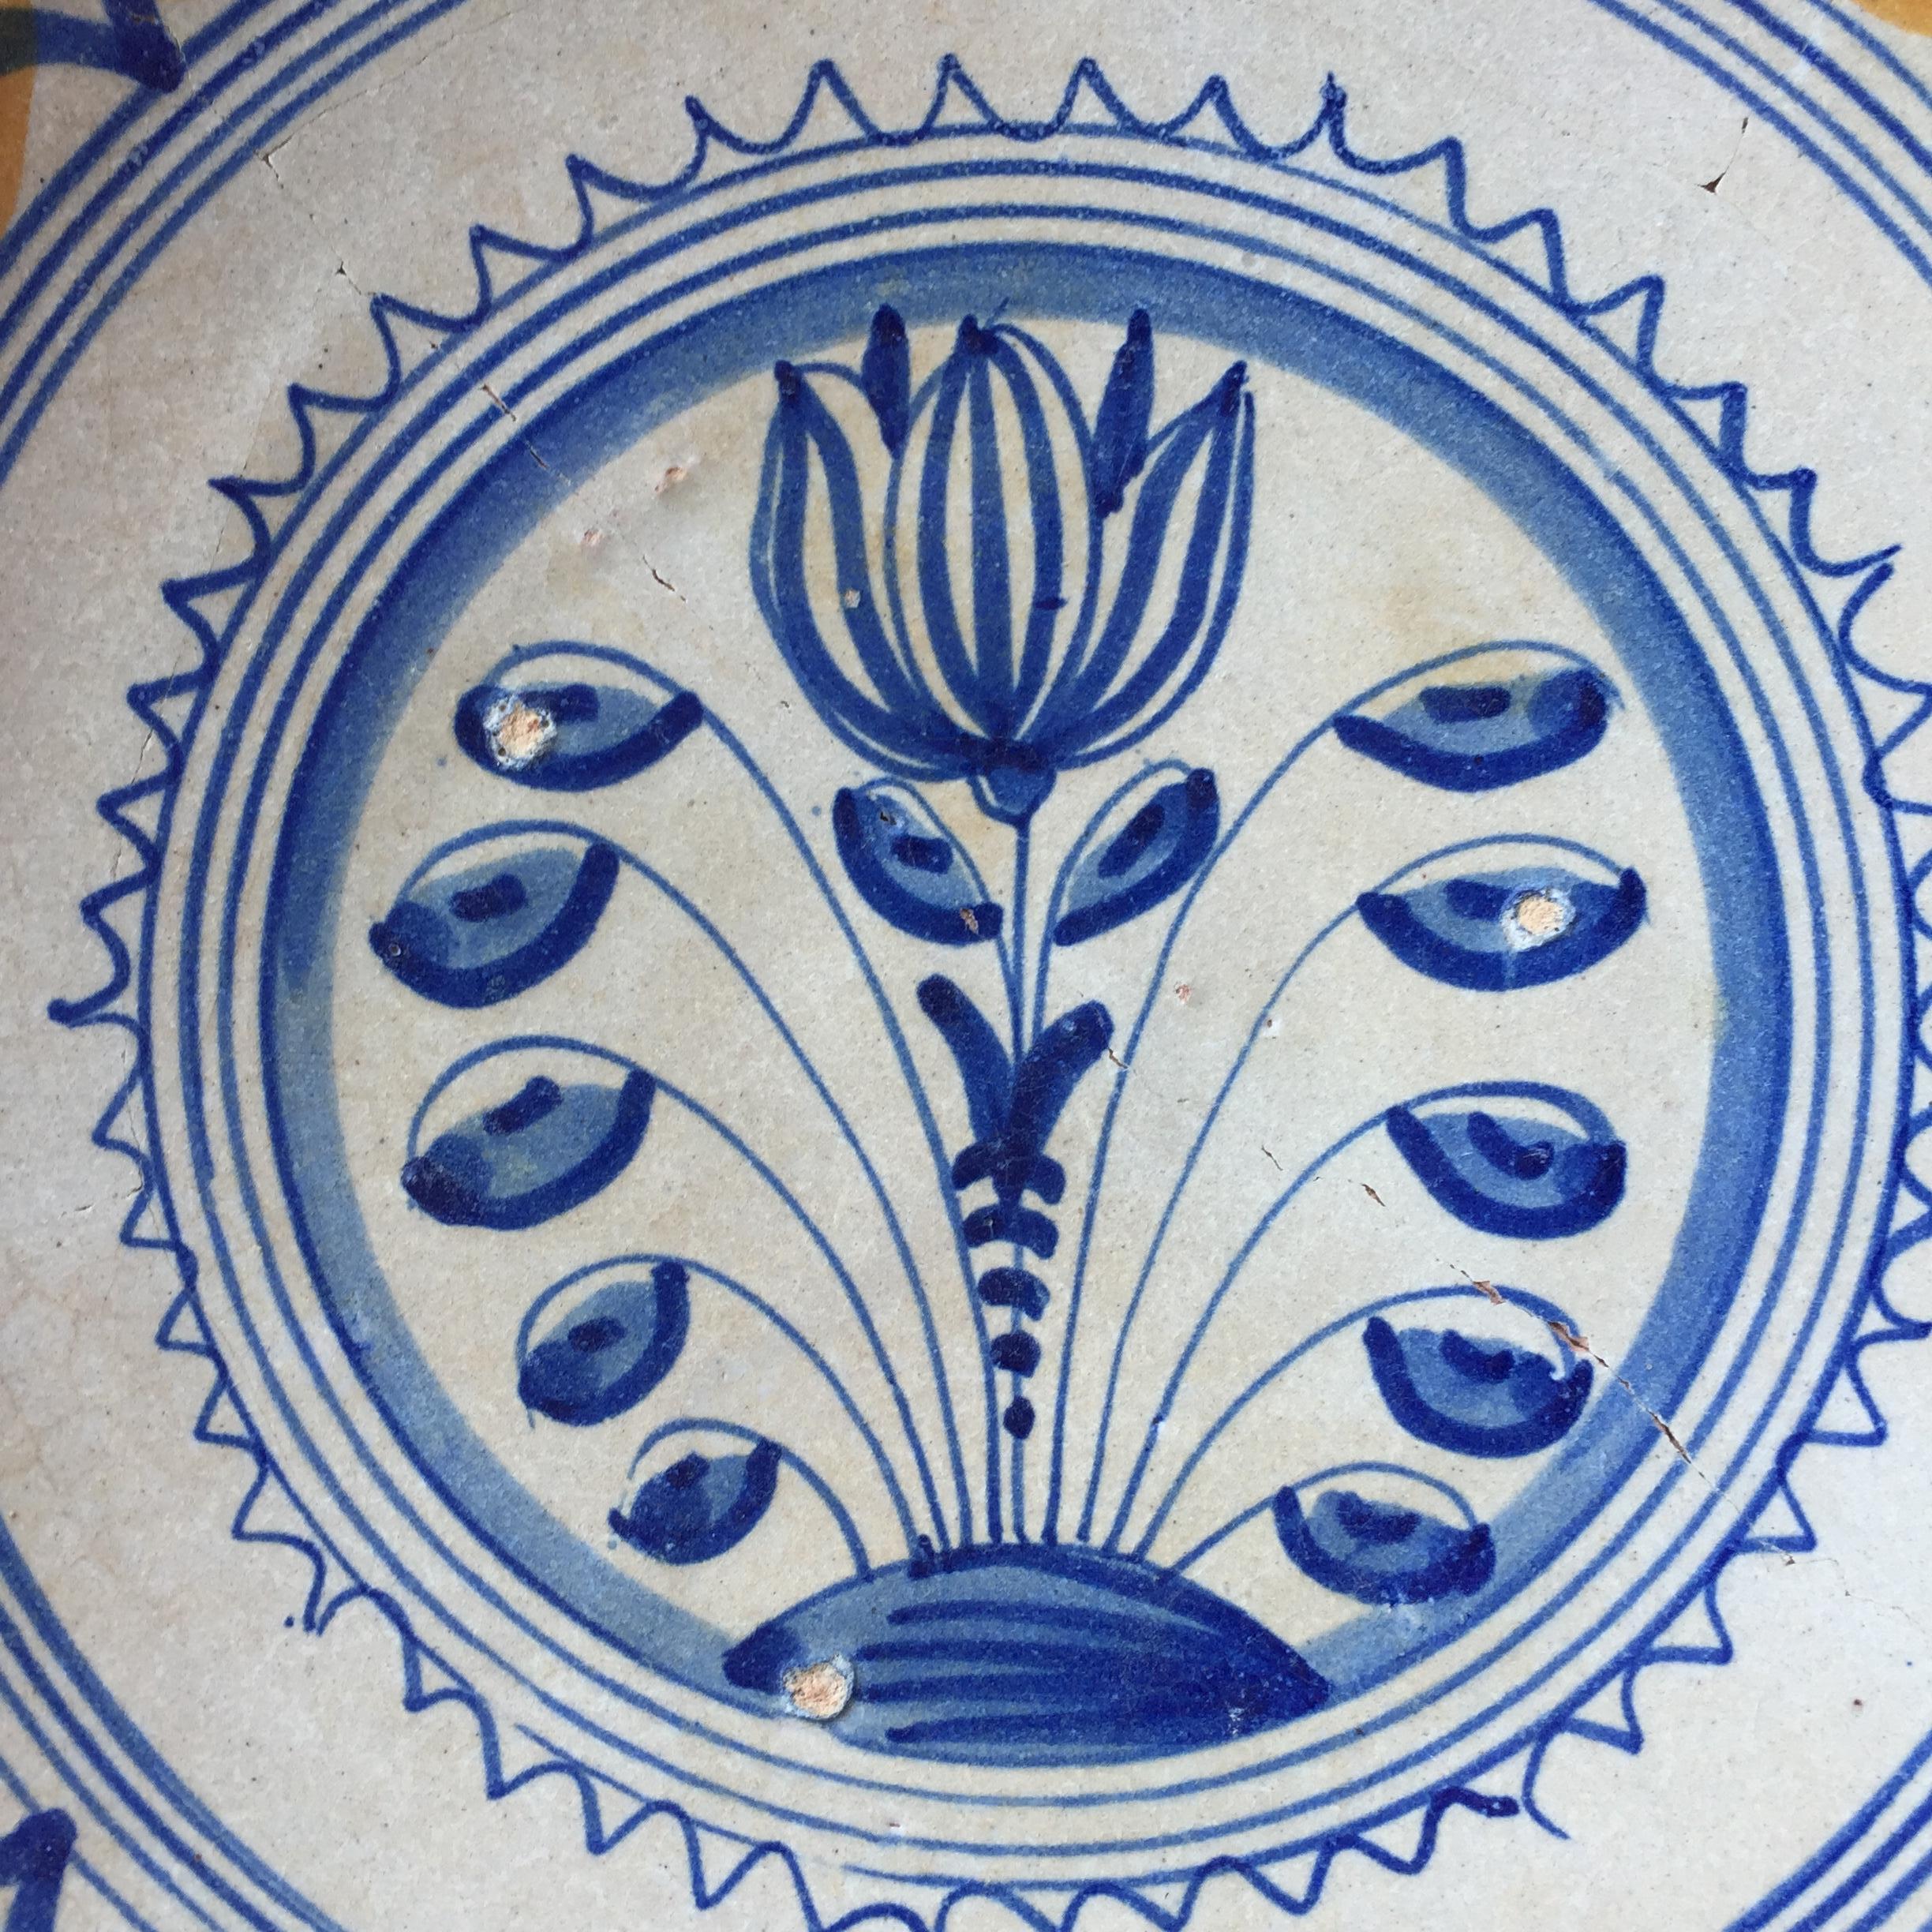 A rare Dutch Majolica plate with a decoration of a tulip.
Northern Netherlands, probably made in the city of Rotterdam.
Made 1620 - 1640

Dutch majolica is one of the more rare ceramics known, especially in a condition where it is almost